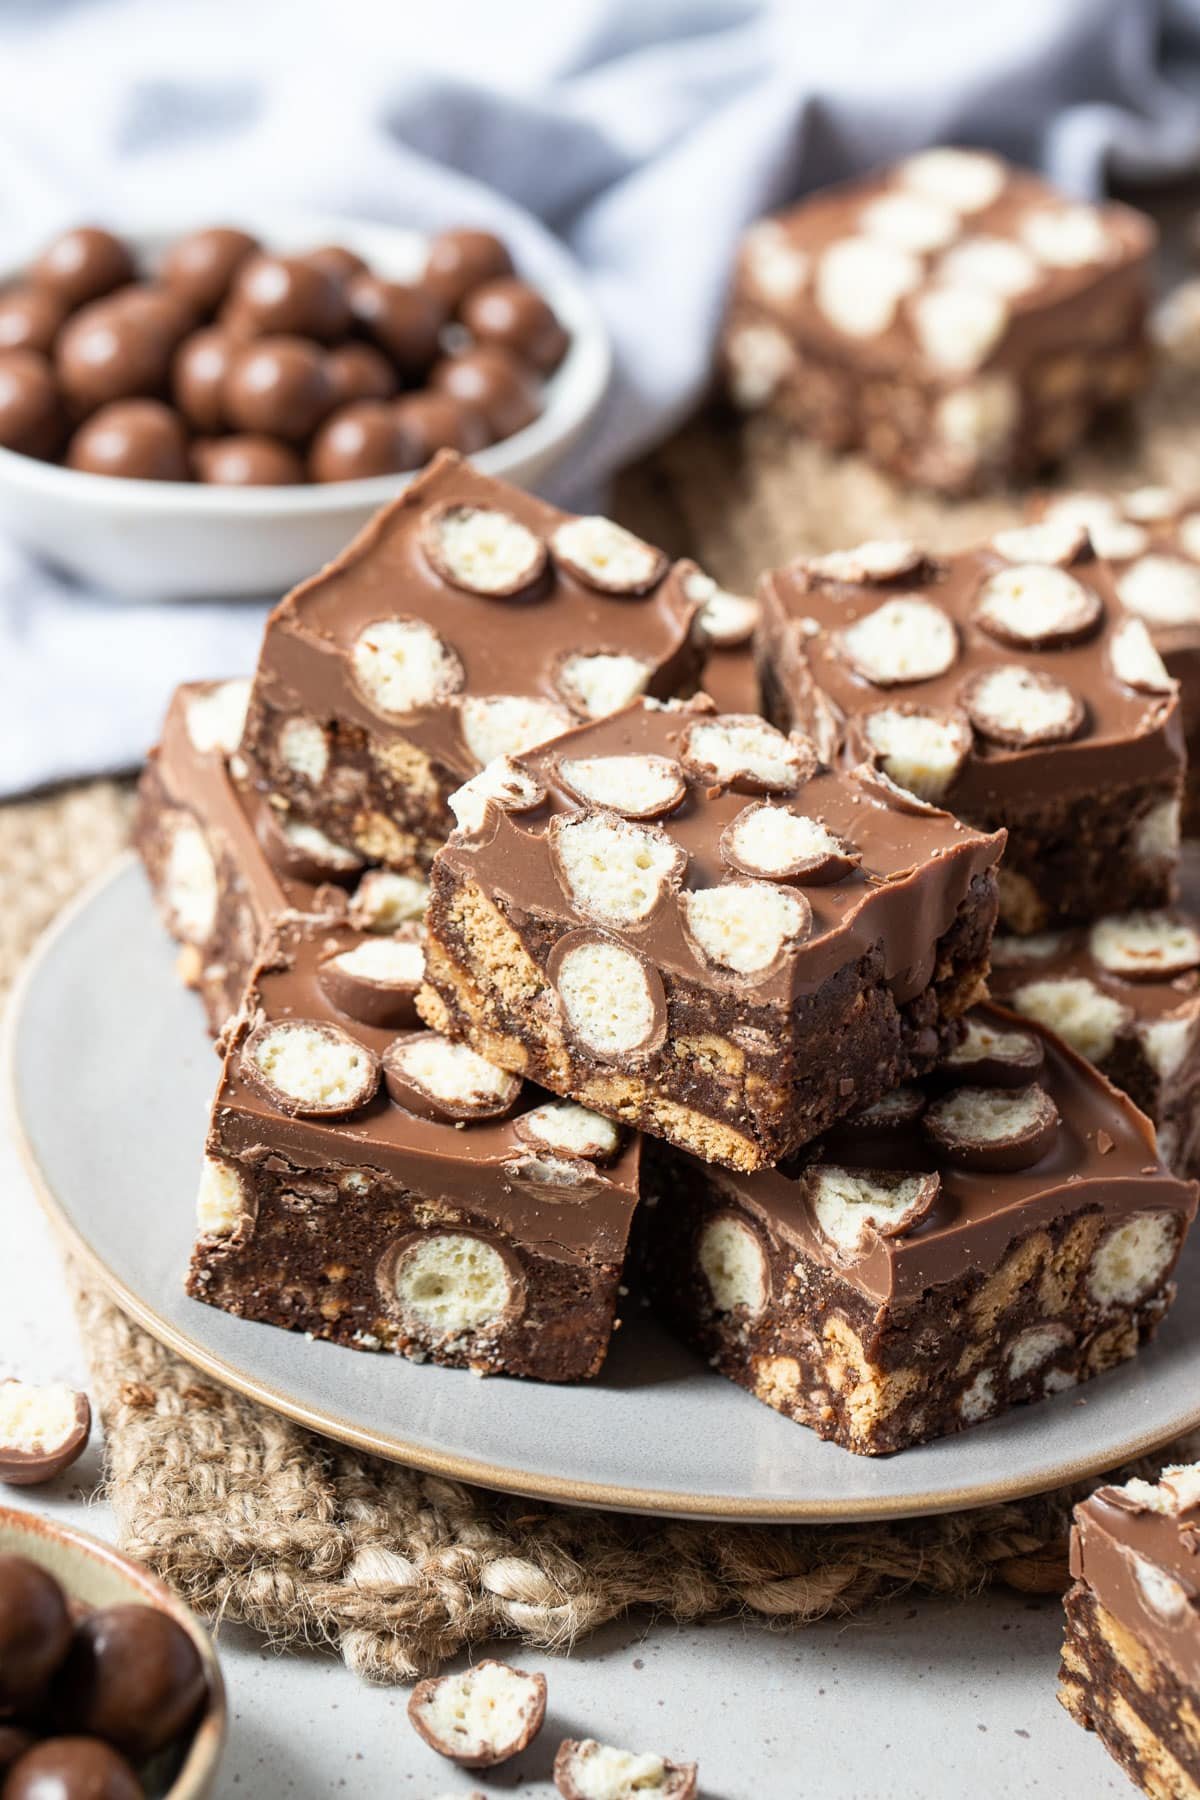 maltesers slice pieces on a plate, topped with chocolate and maltesers.